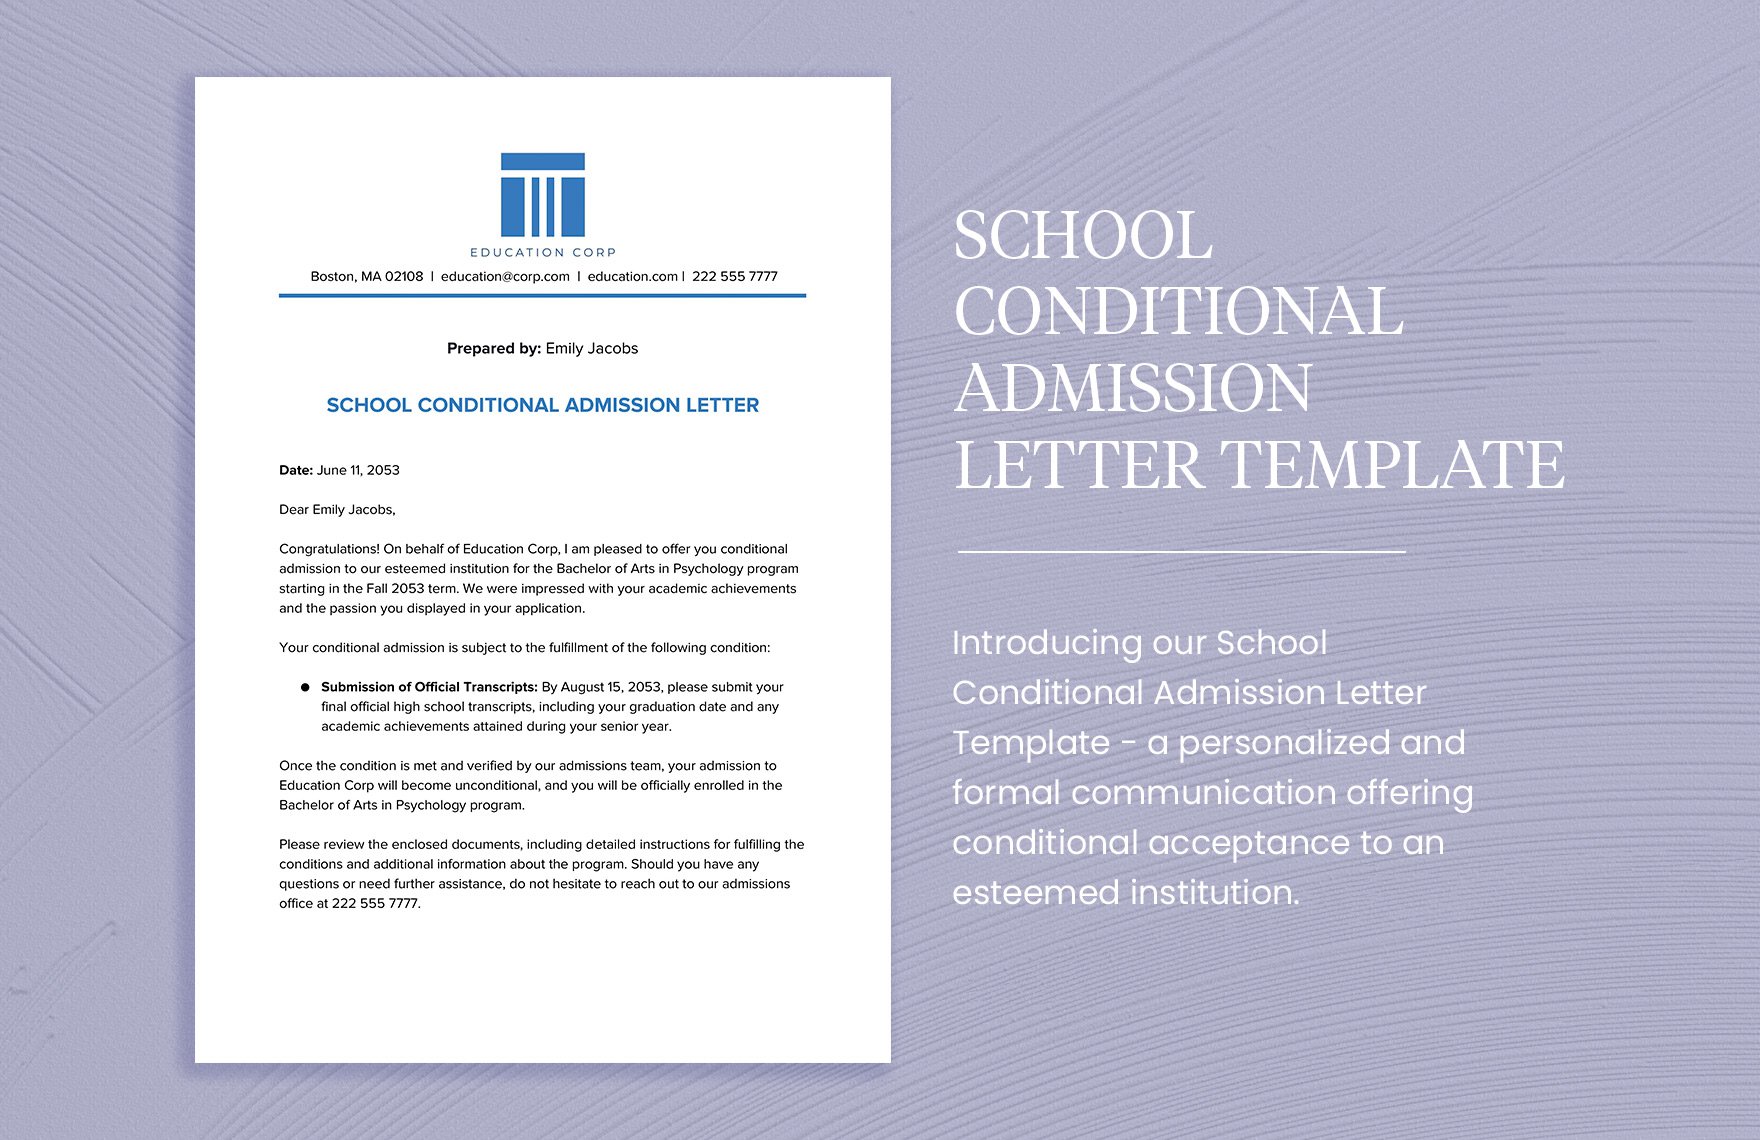 School Conditional Admission Letter Template